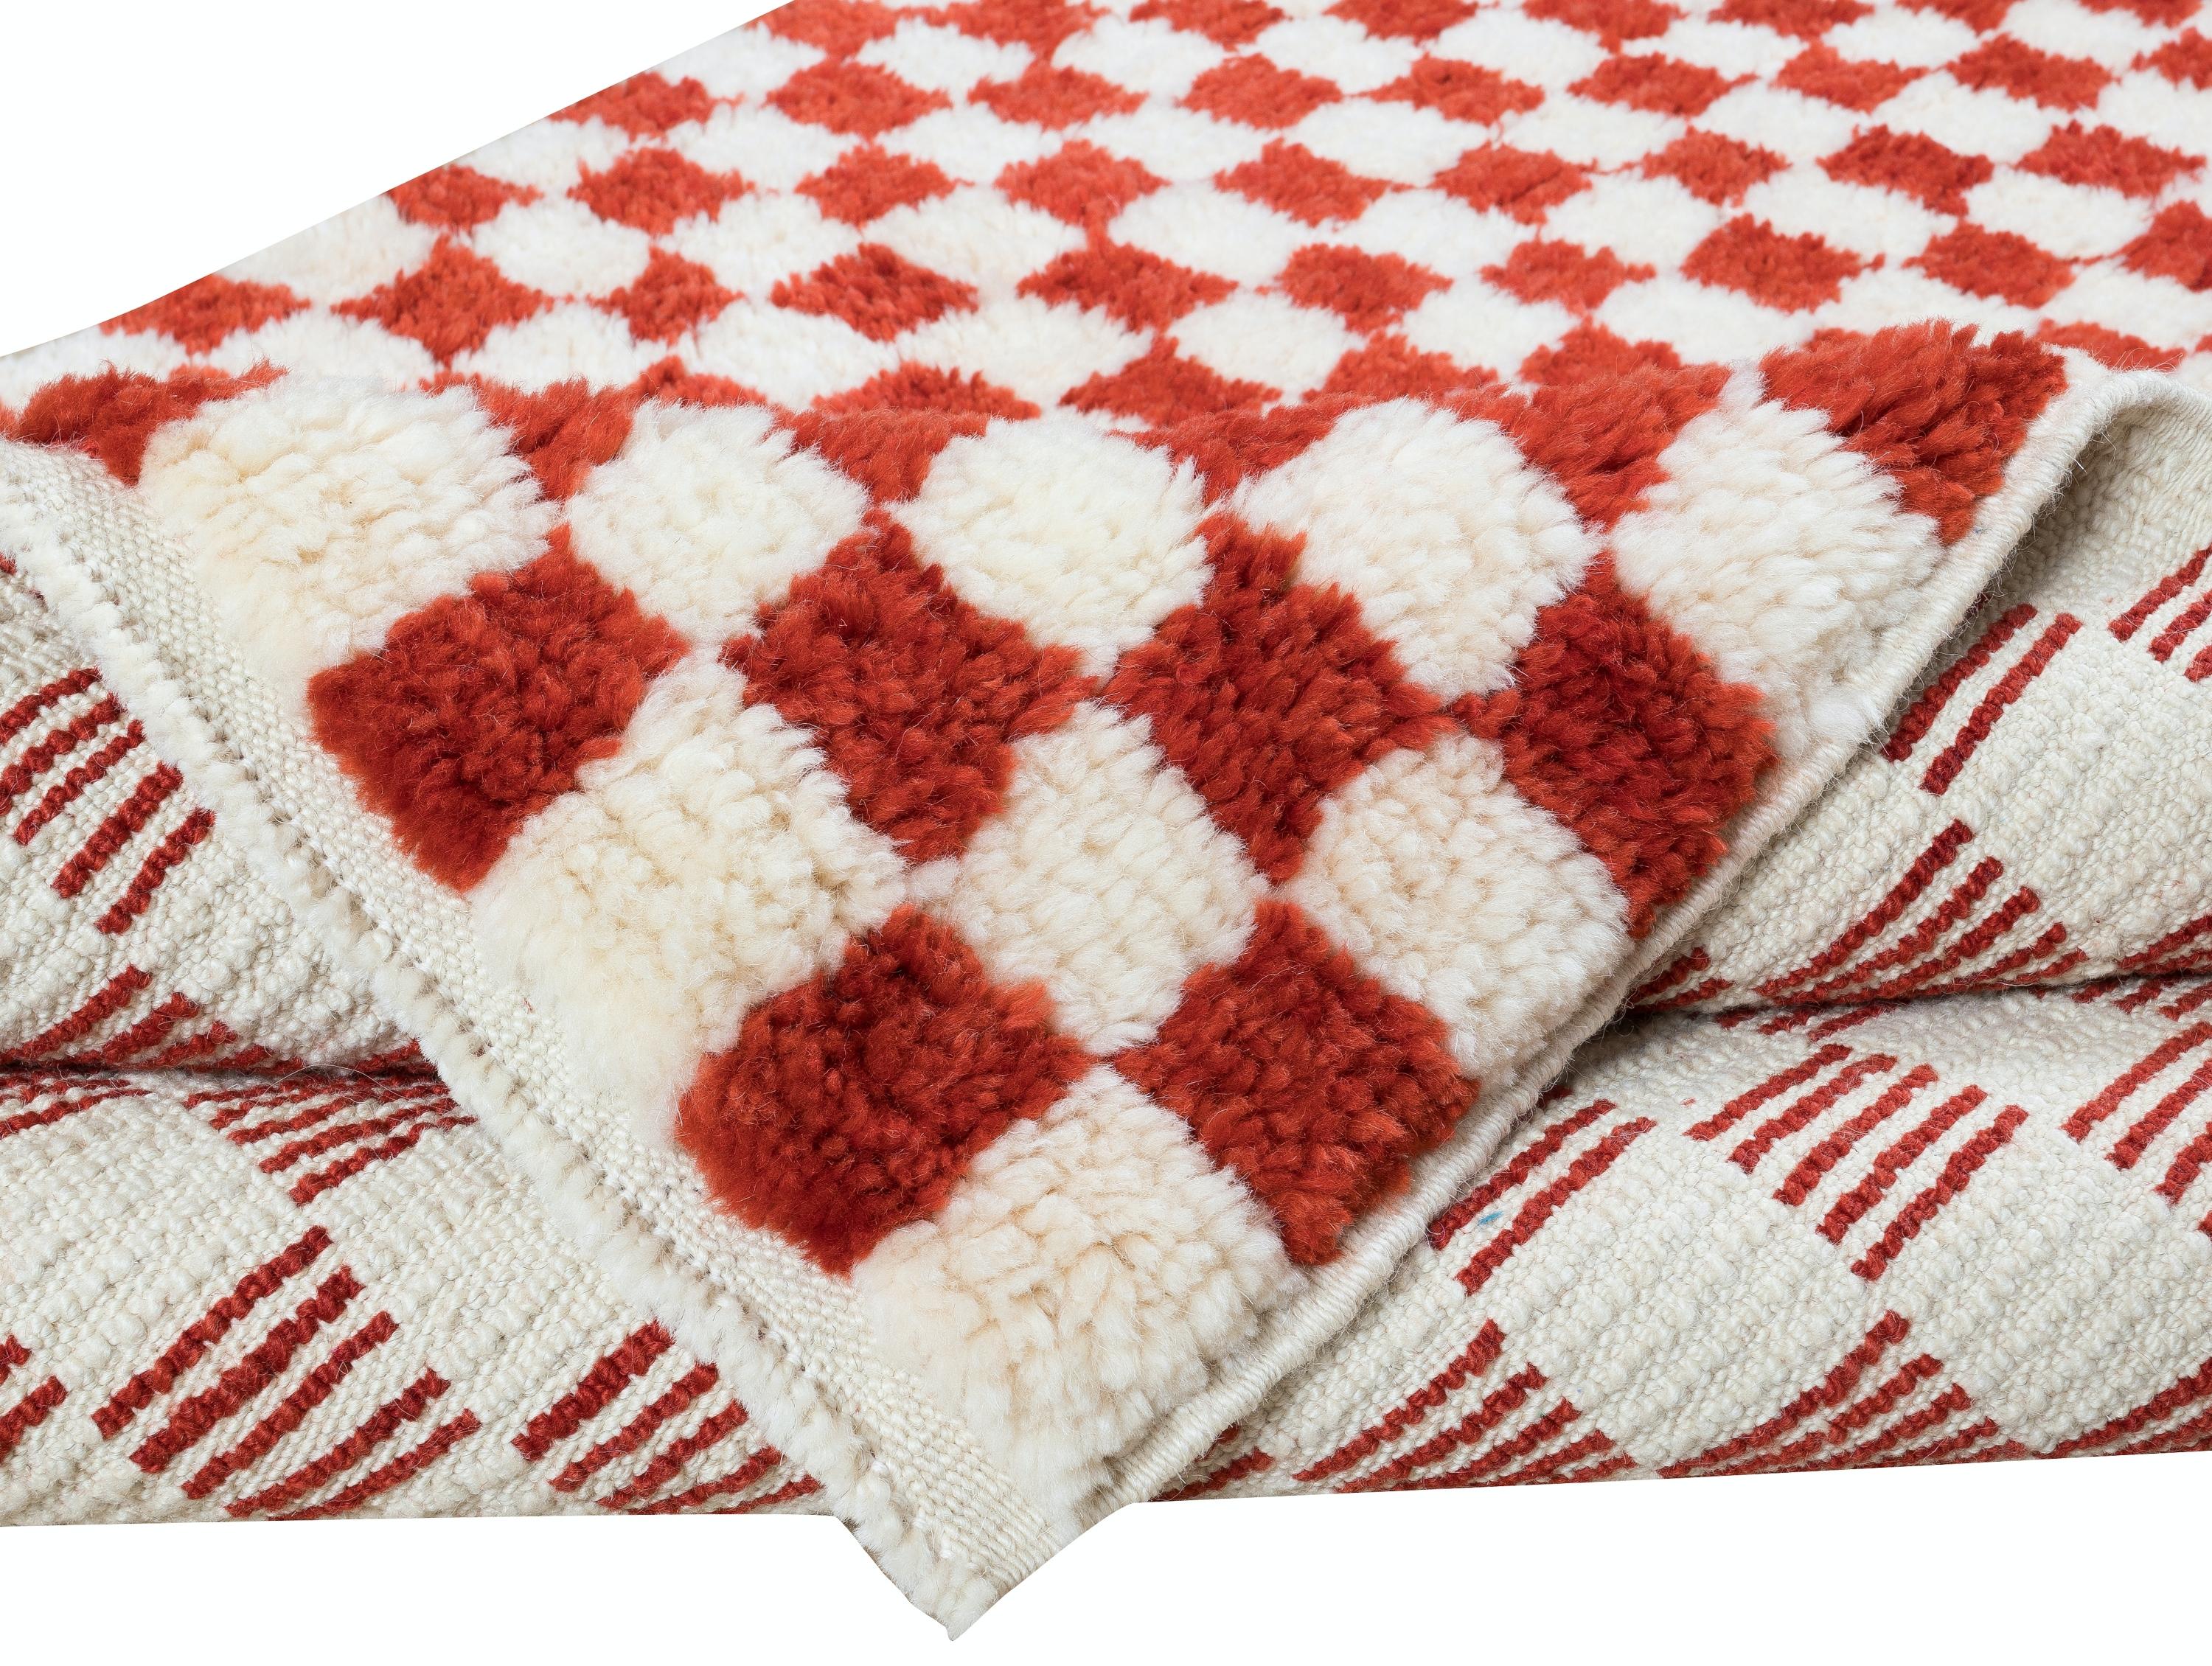 A custom, handmade Tulu rug made from 100% Hand-Spun Wool of finest quality. It features a simple checkered design in cream and red. Measures: 4 x 6

The rug can be CUSTOM-PRODUCED in any Design, Size, Color Combination and Pile Thickness requested.